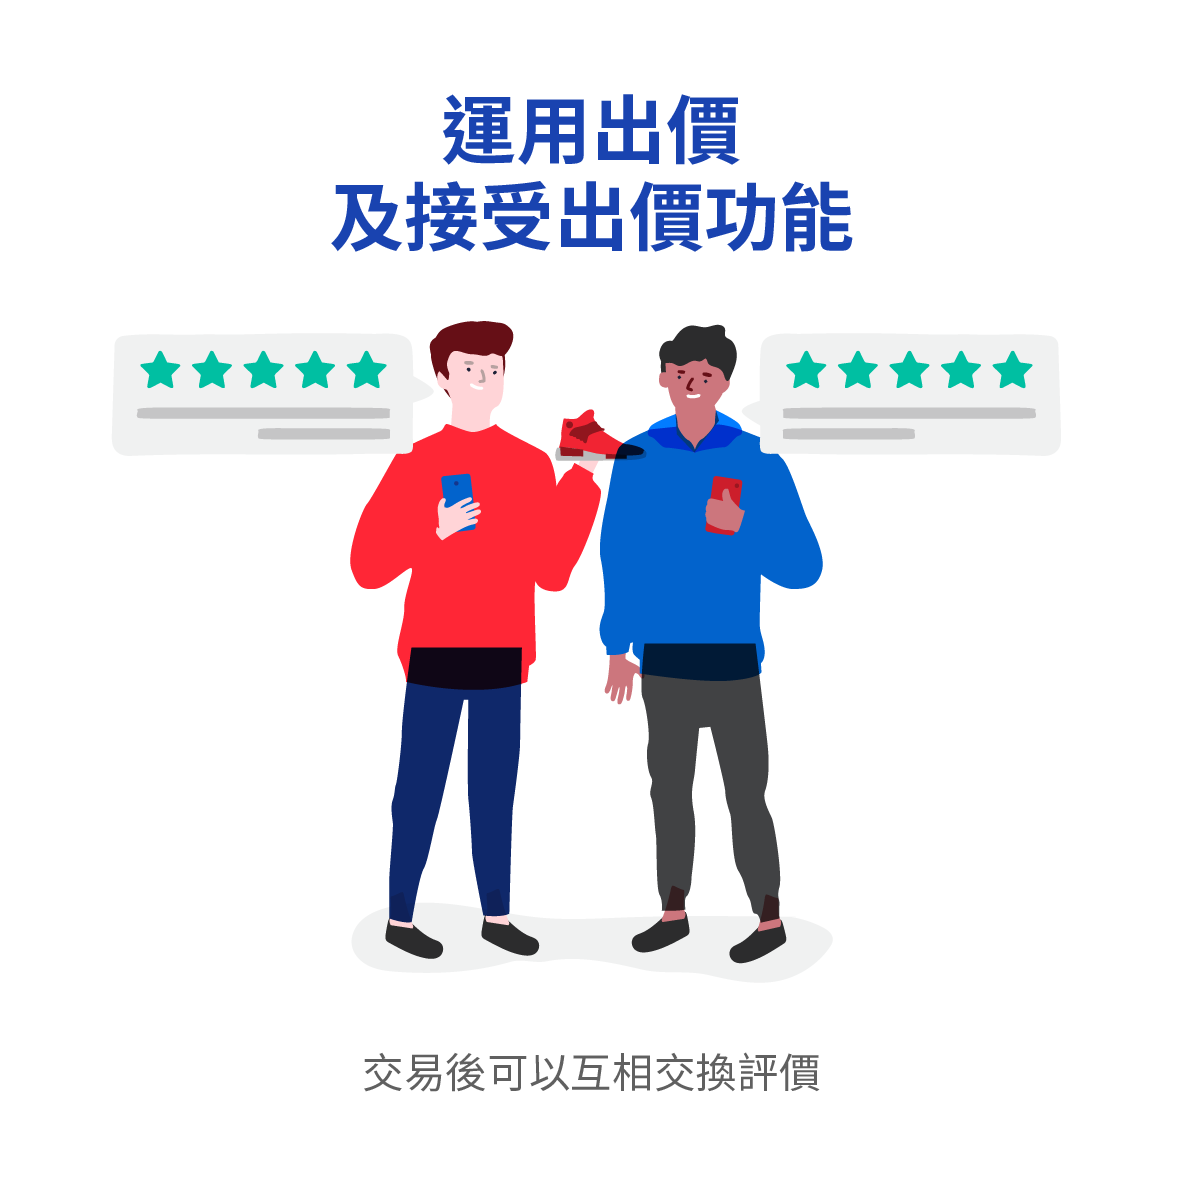 HelpCentre_How-to-deal-safely-on-Carousell_HK-3.png